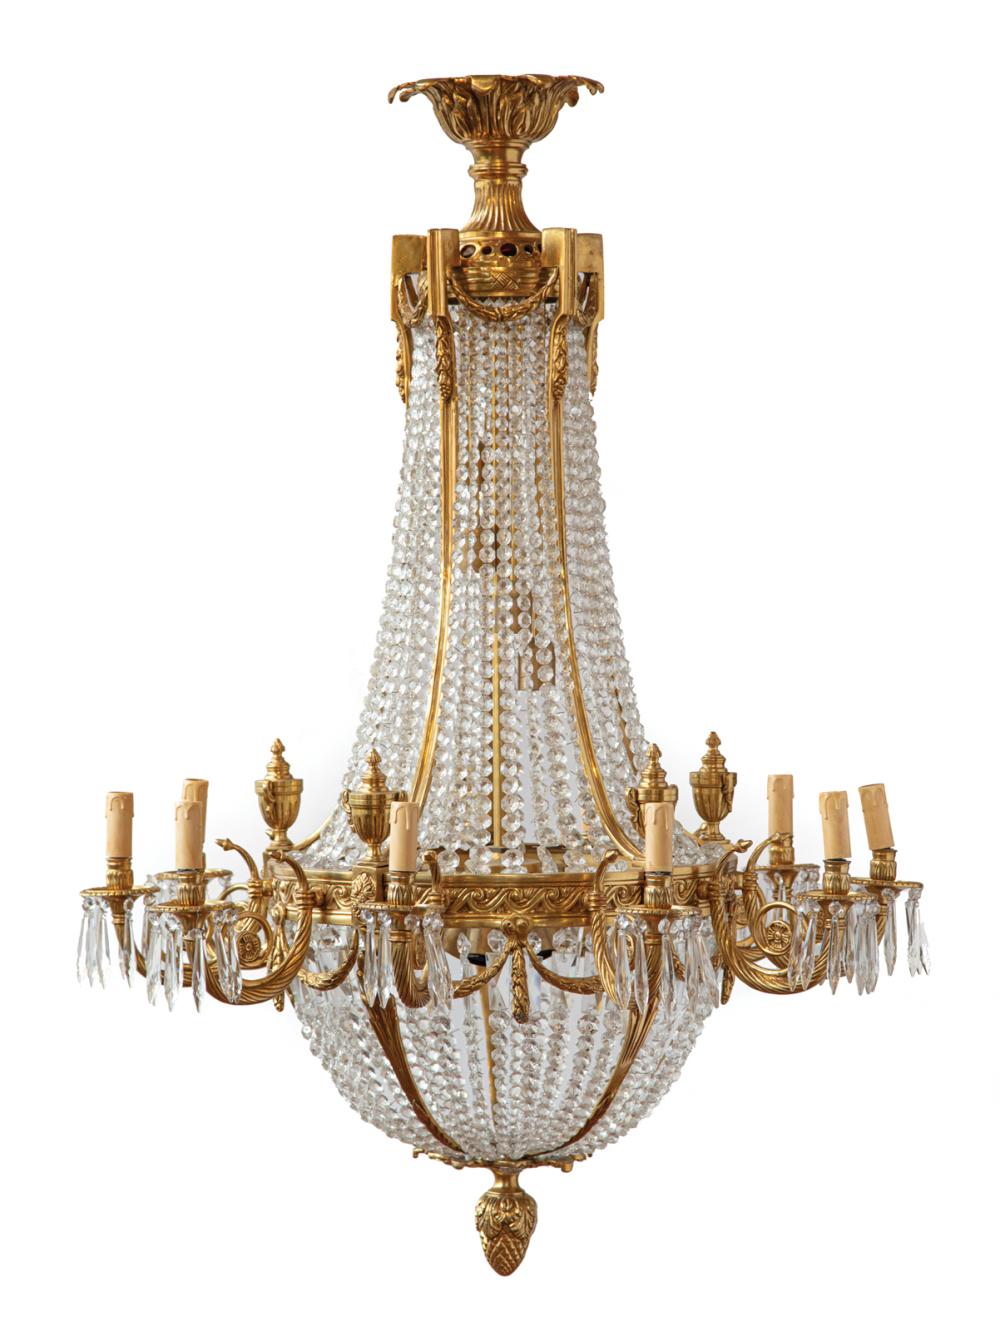 FRENCH BRONZE AND CRYSTAL CHANDELIERFrench